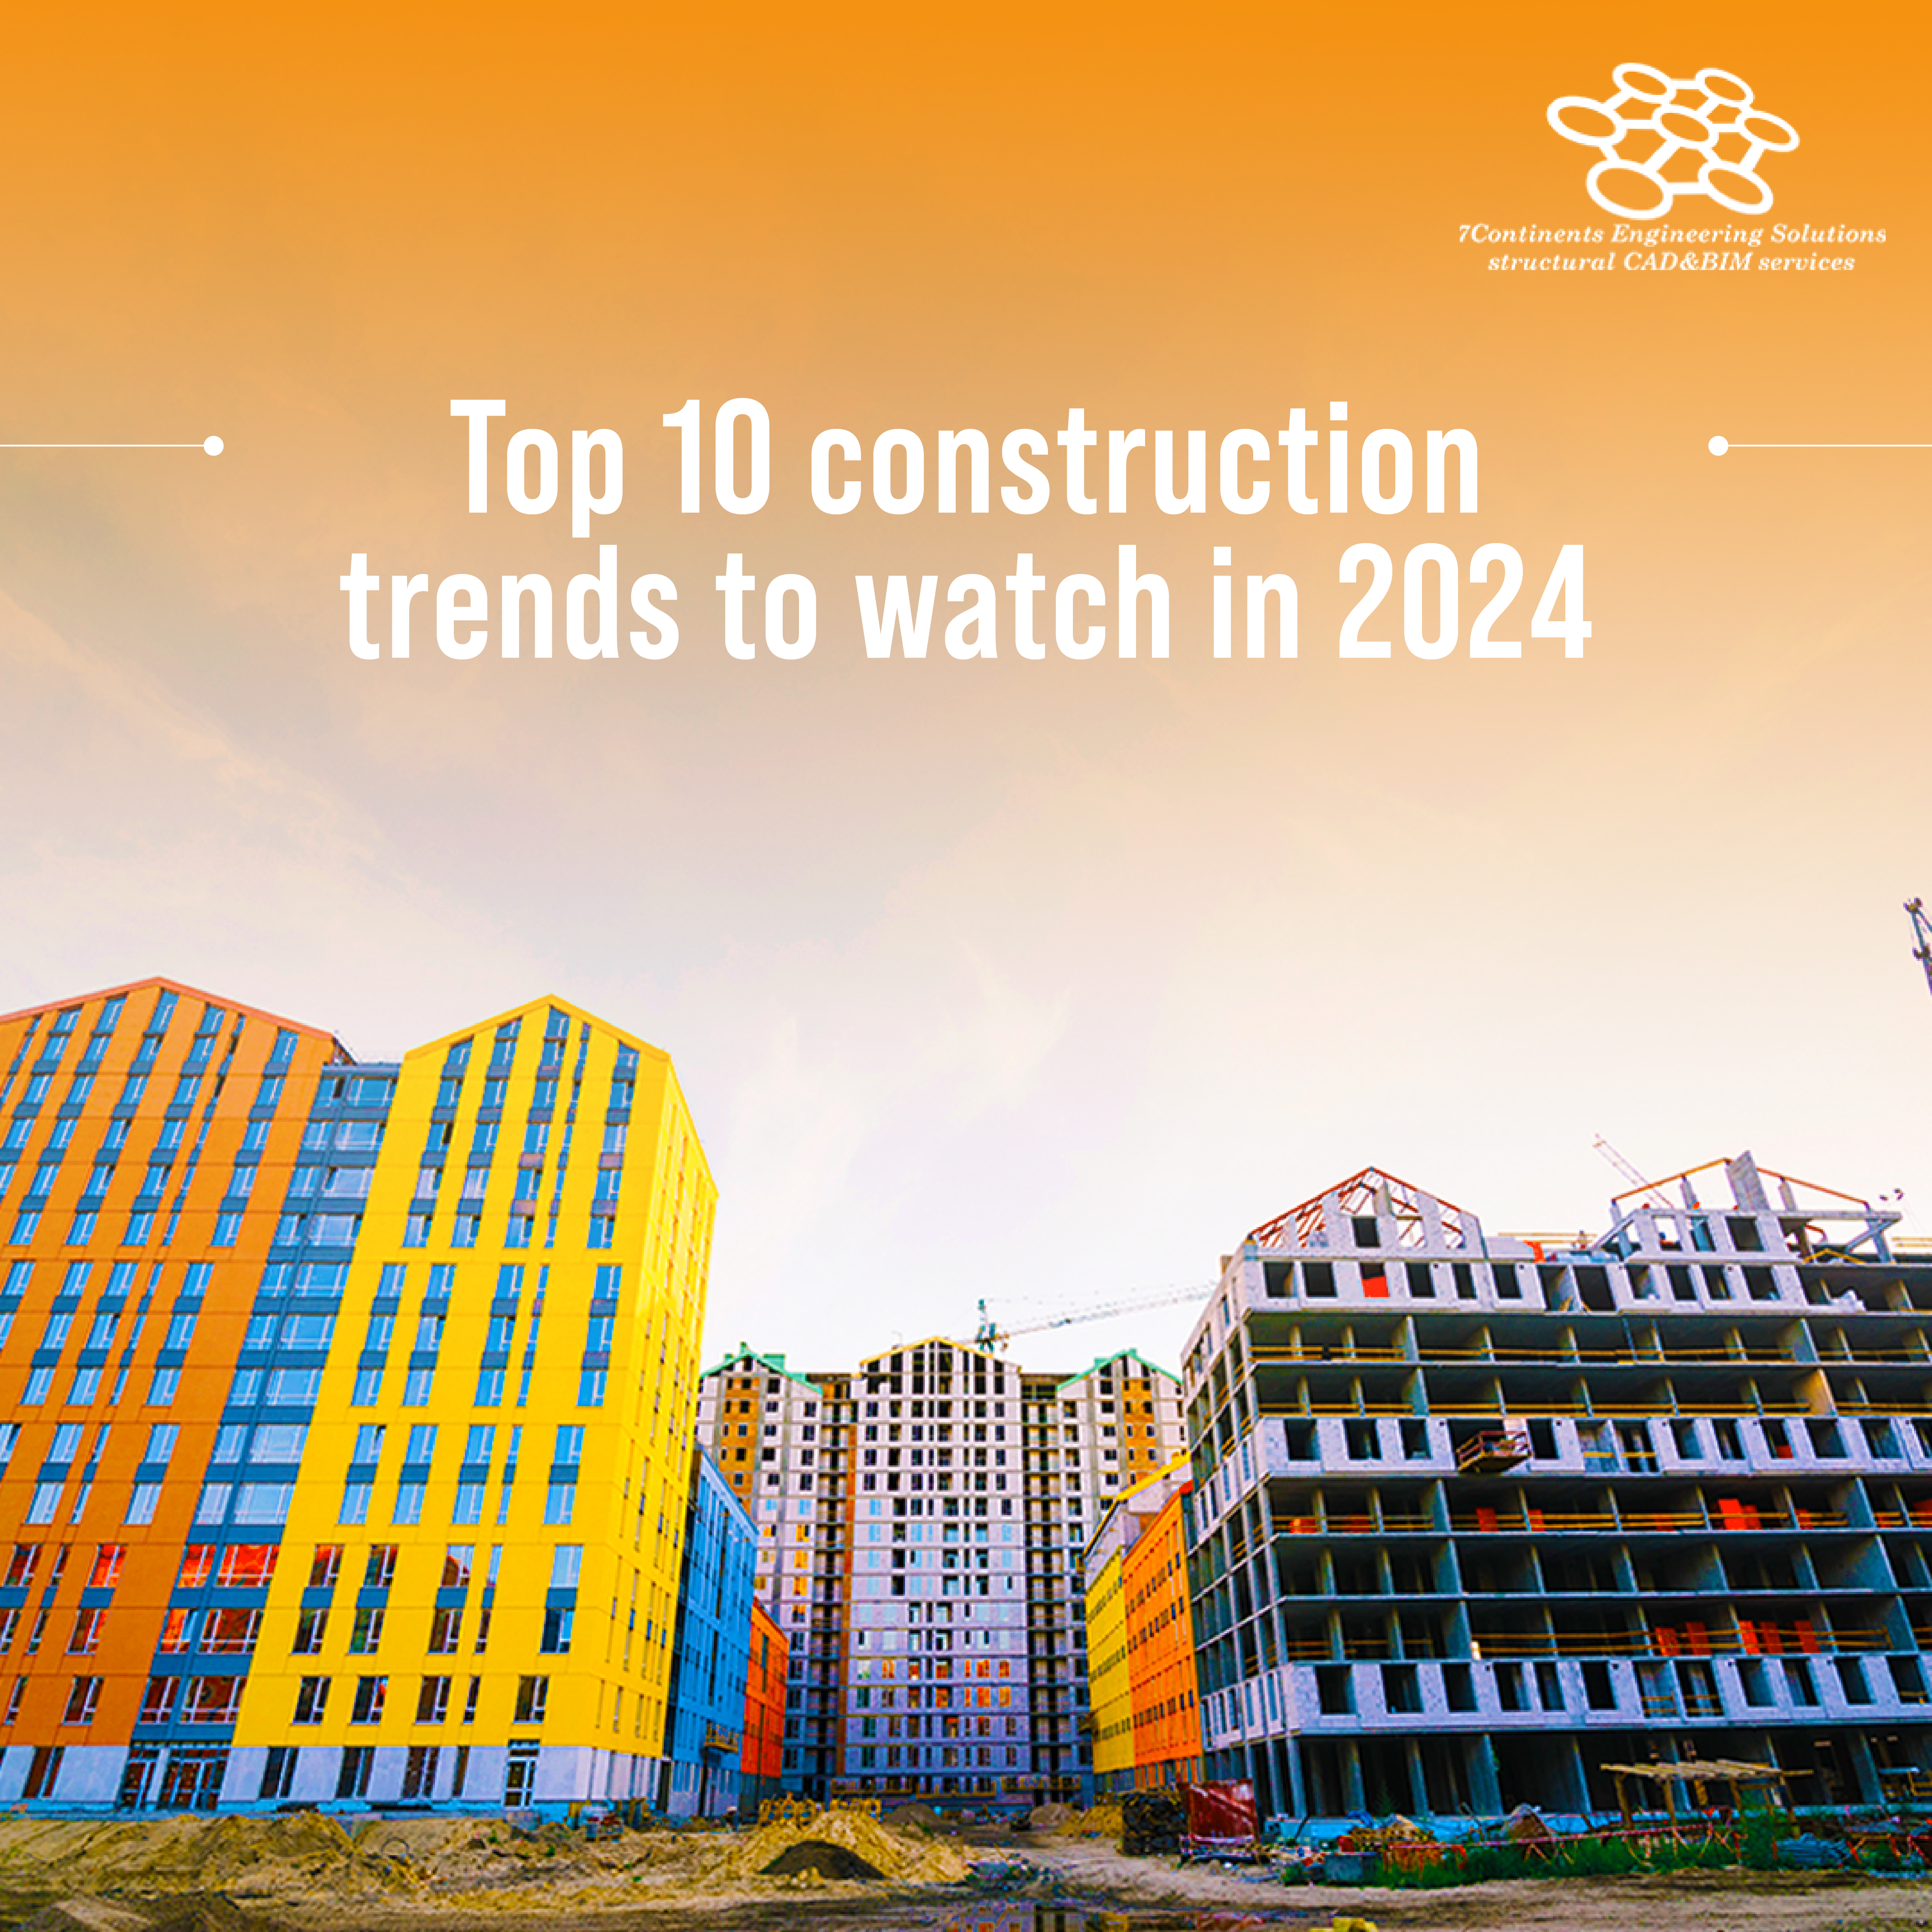 Top 10 Construction Trends to Watch in 2024